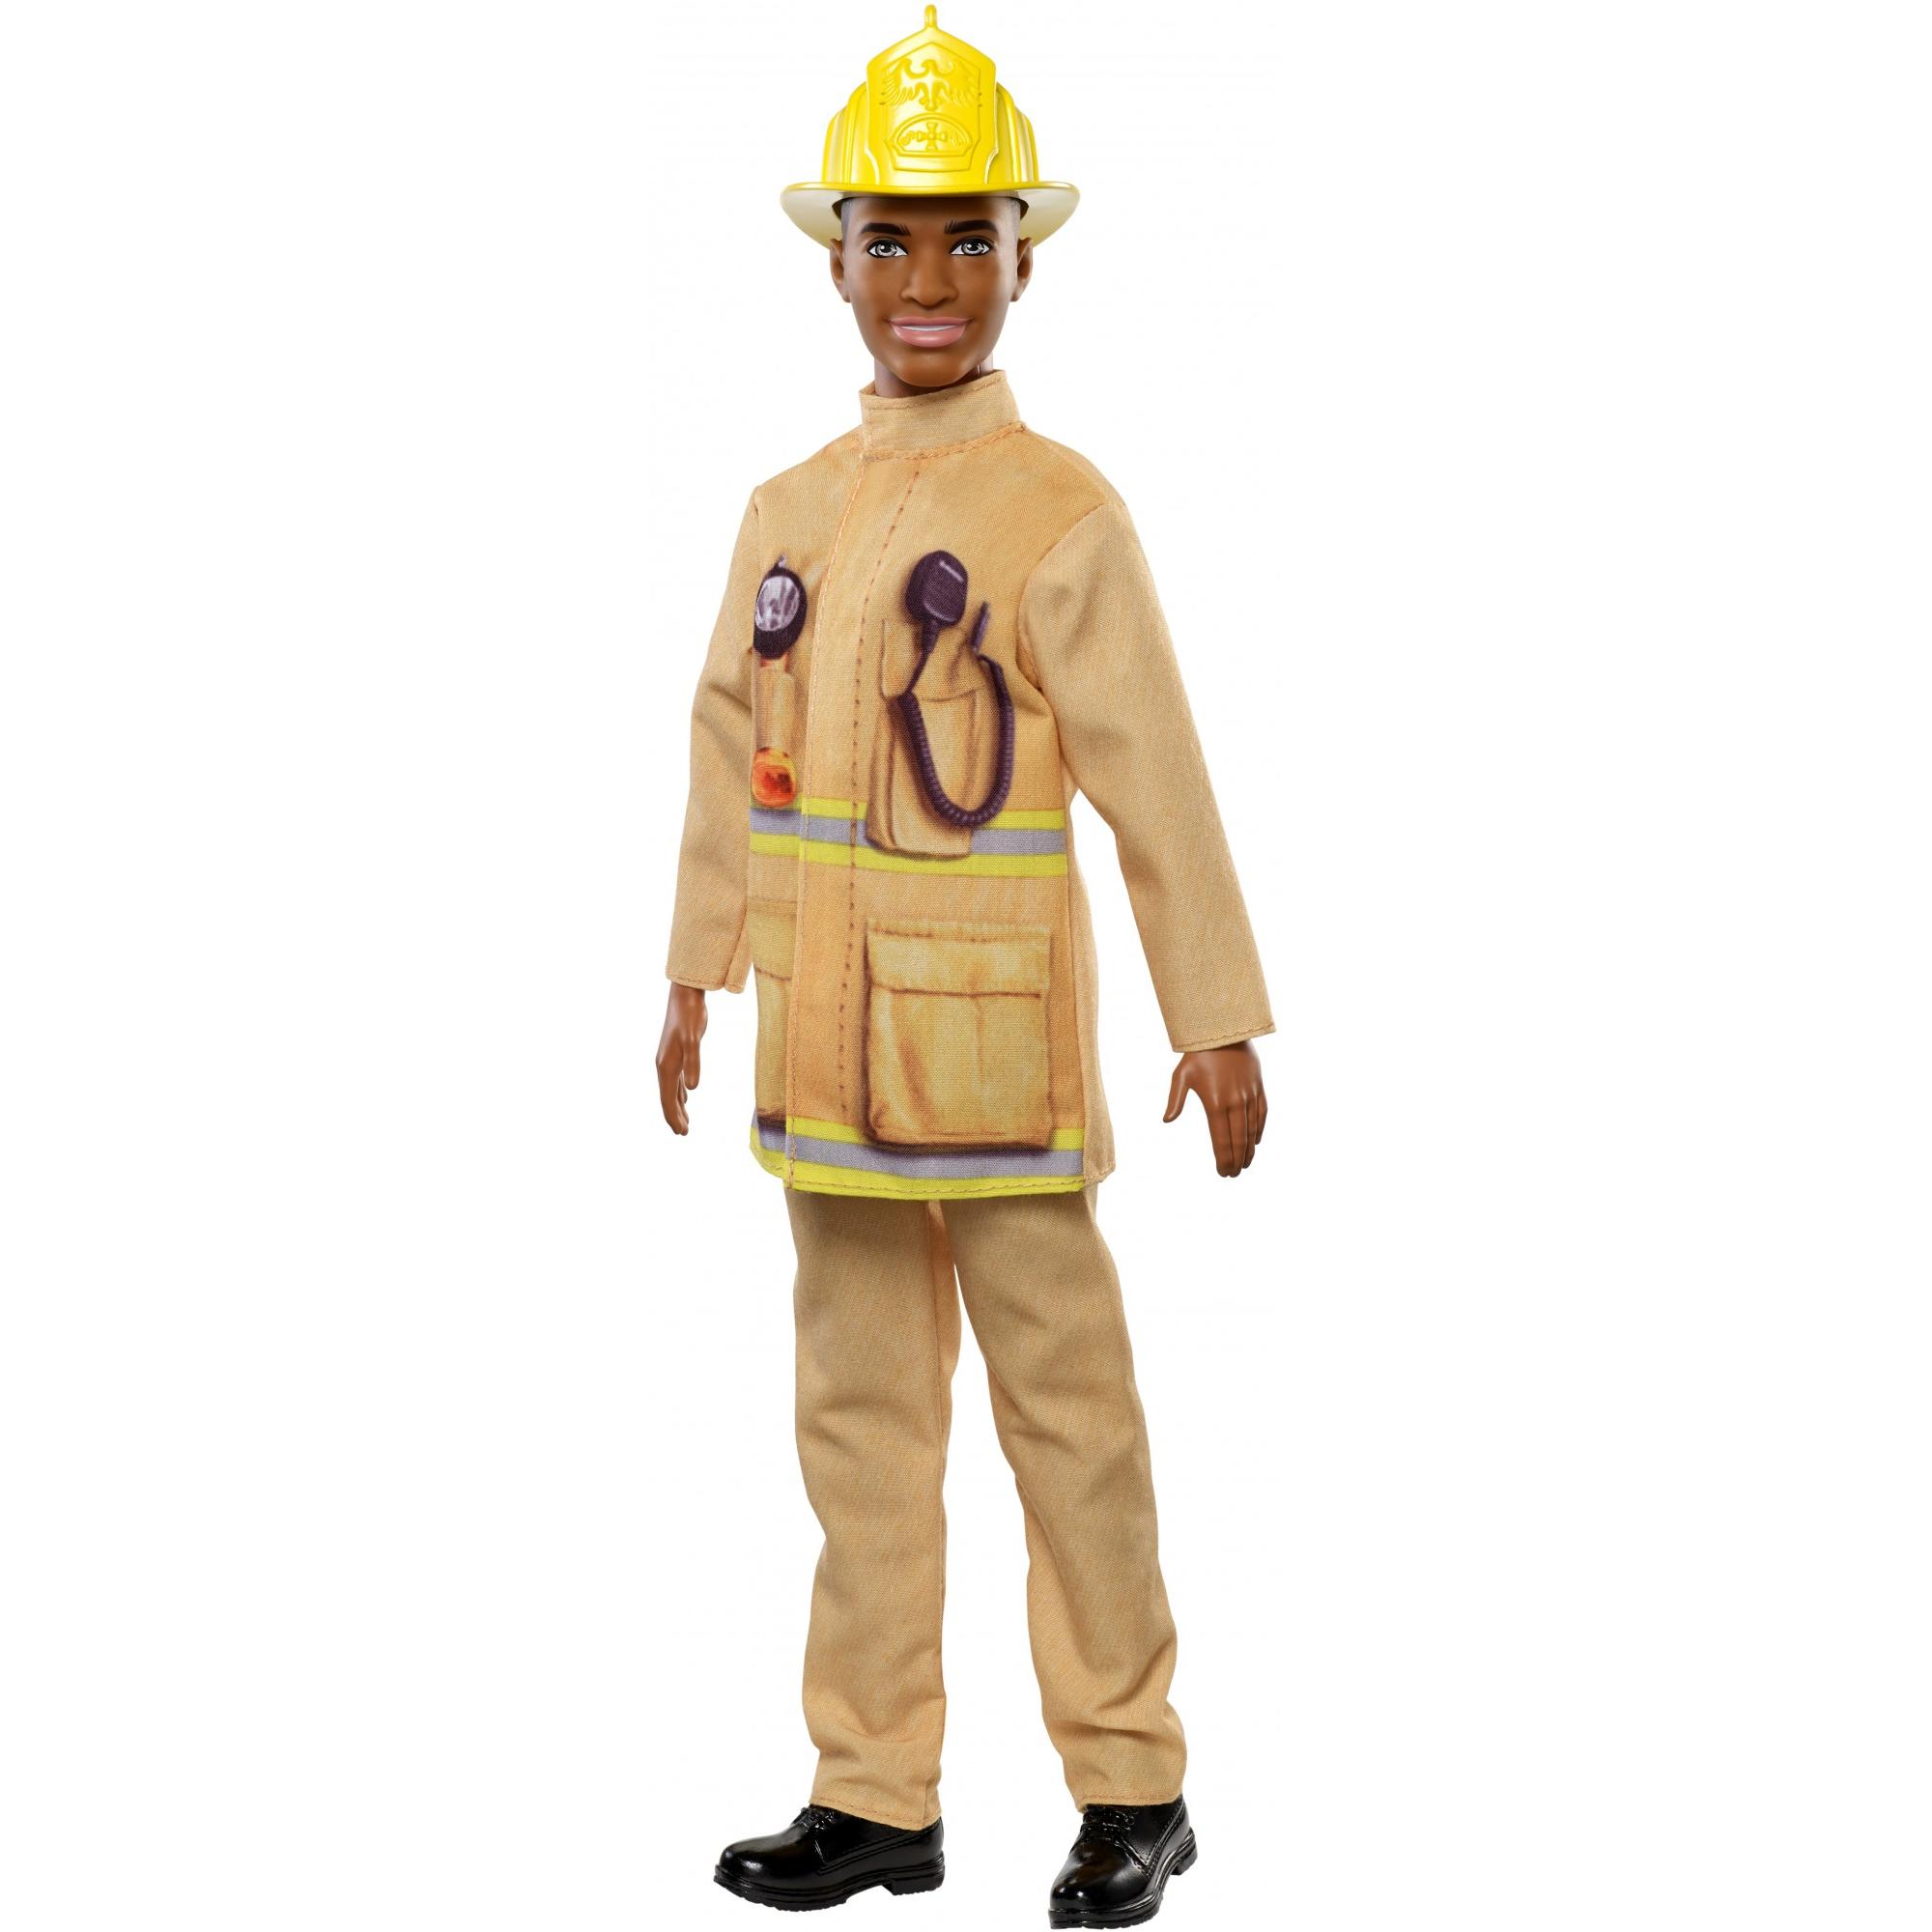 Barbie Ken Careers Firefighter Doll with Career-Themed Accessories - image 1 of 6